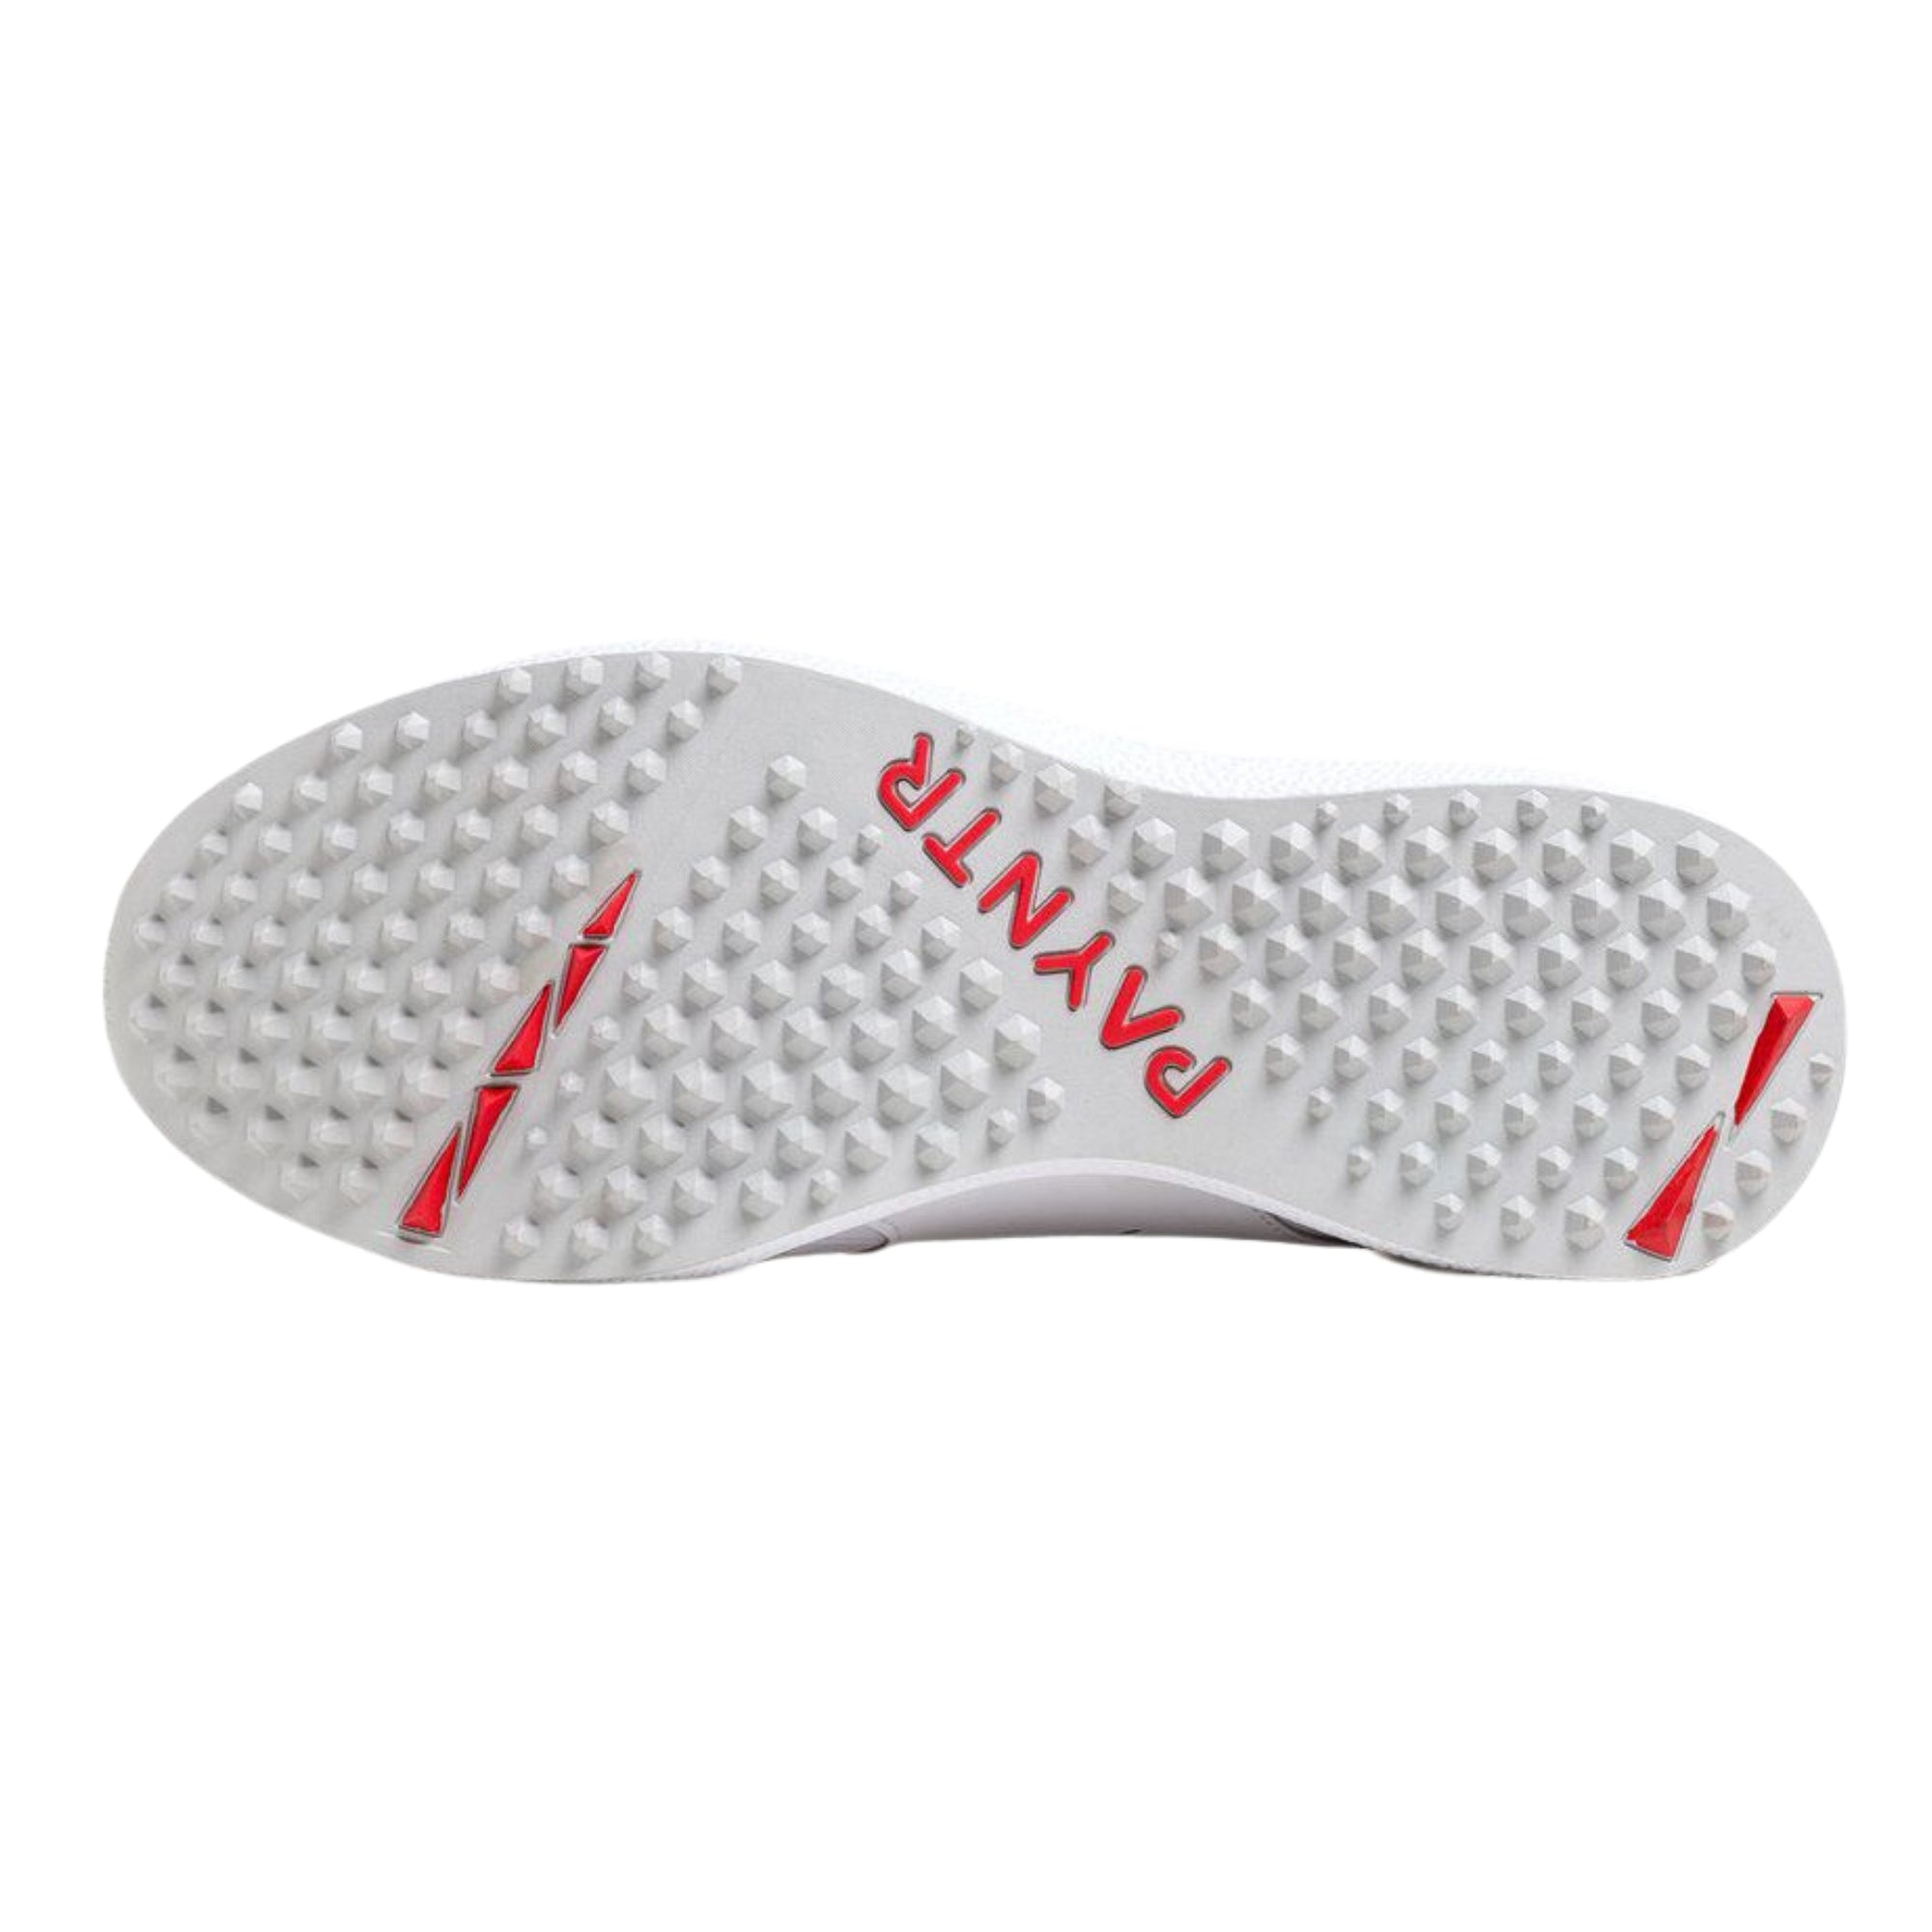 Payntr Cricket Shoes, Model V Pimple - White All Rounder Cricket Shoes